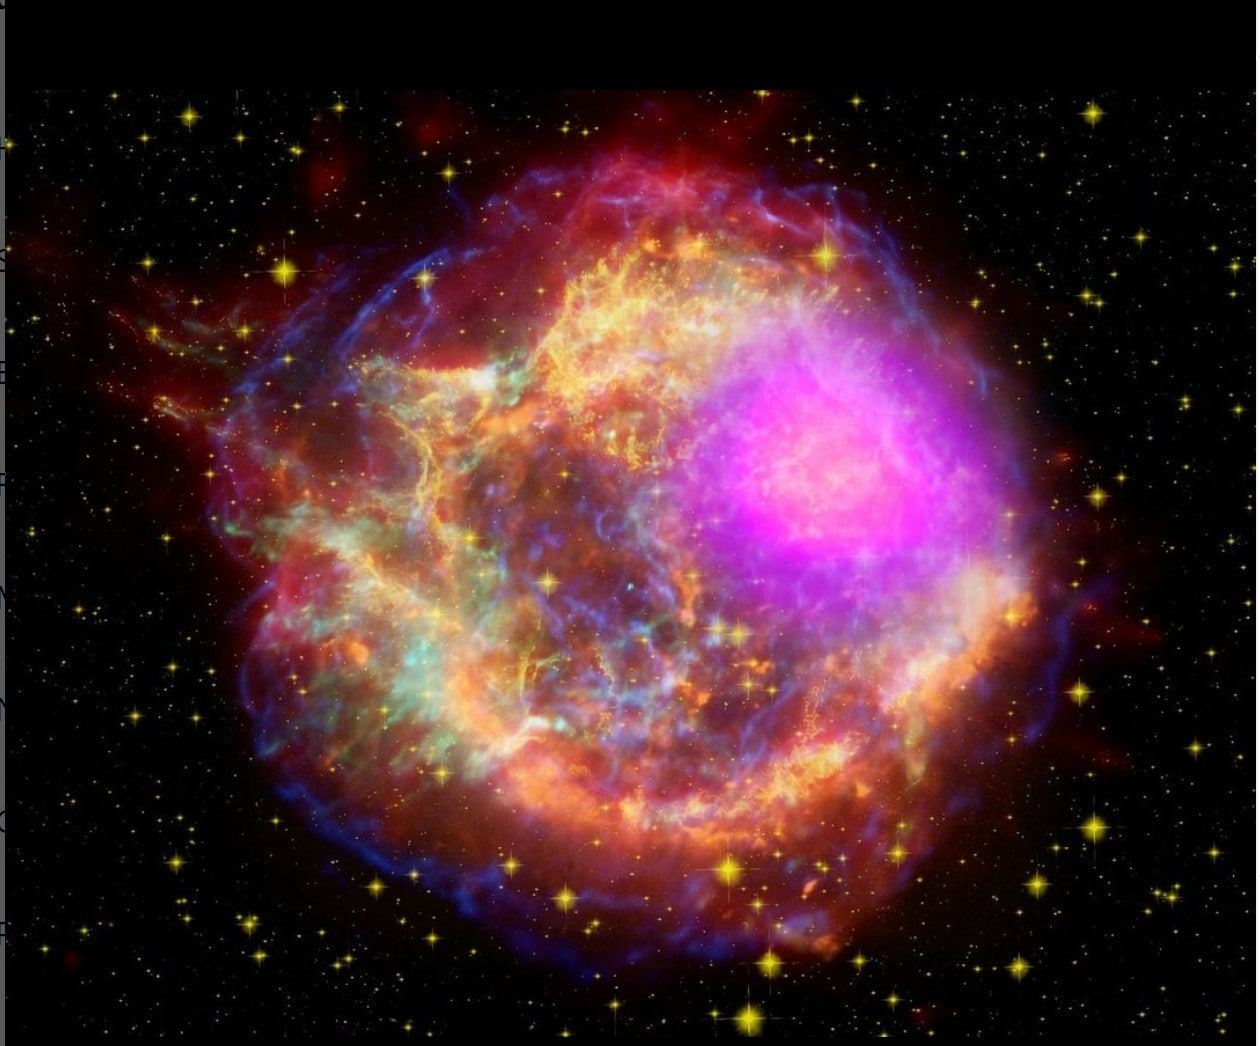 Supernova remnant Cassiopeia A radiating bright energy in space